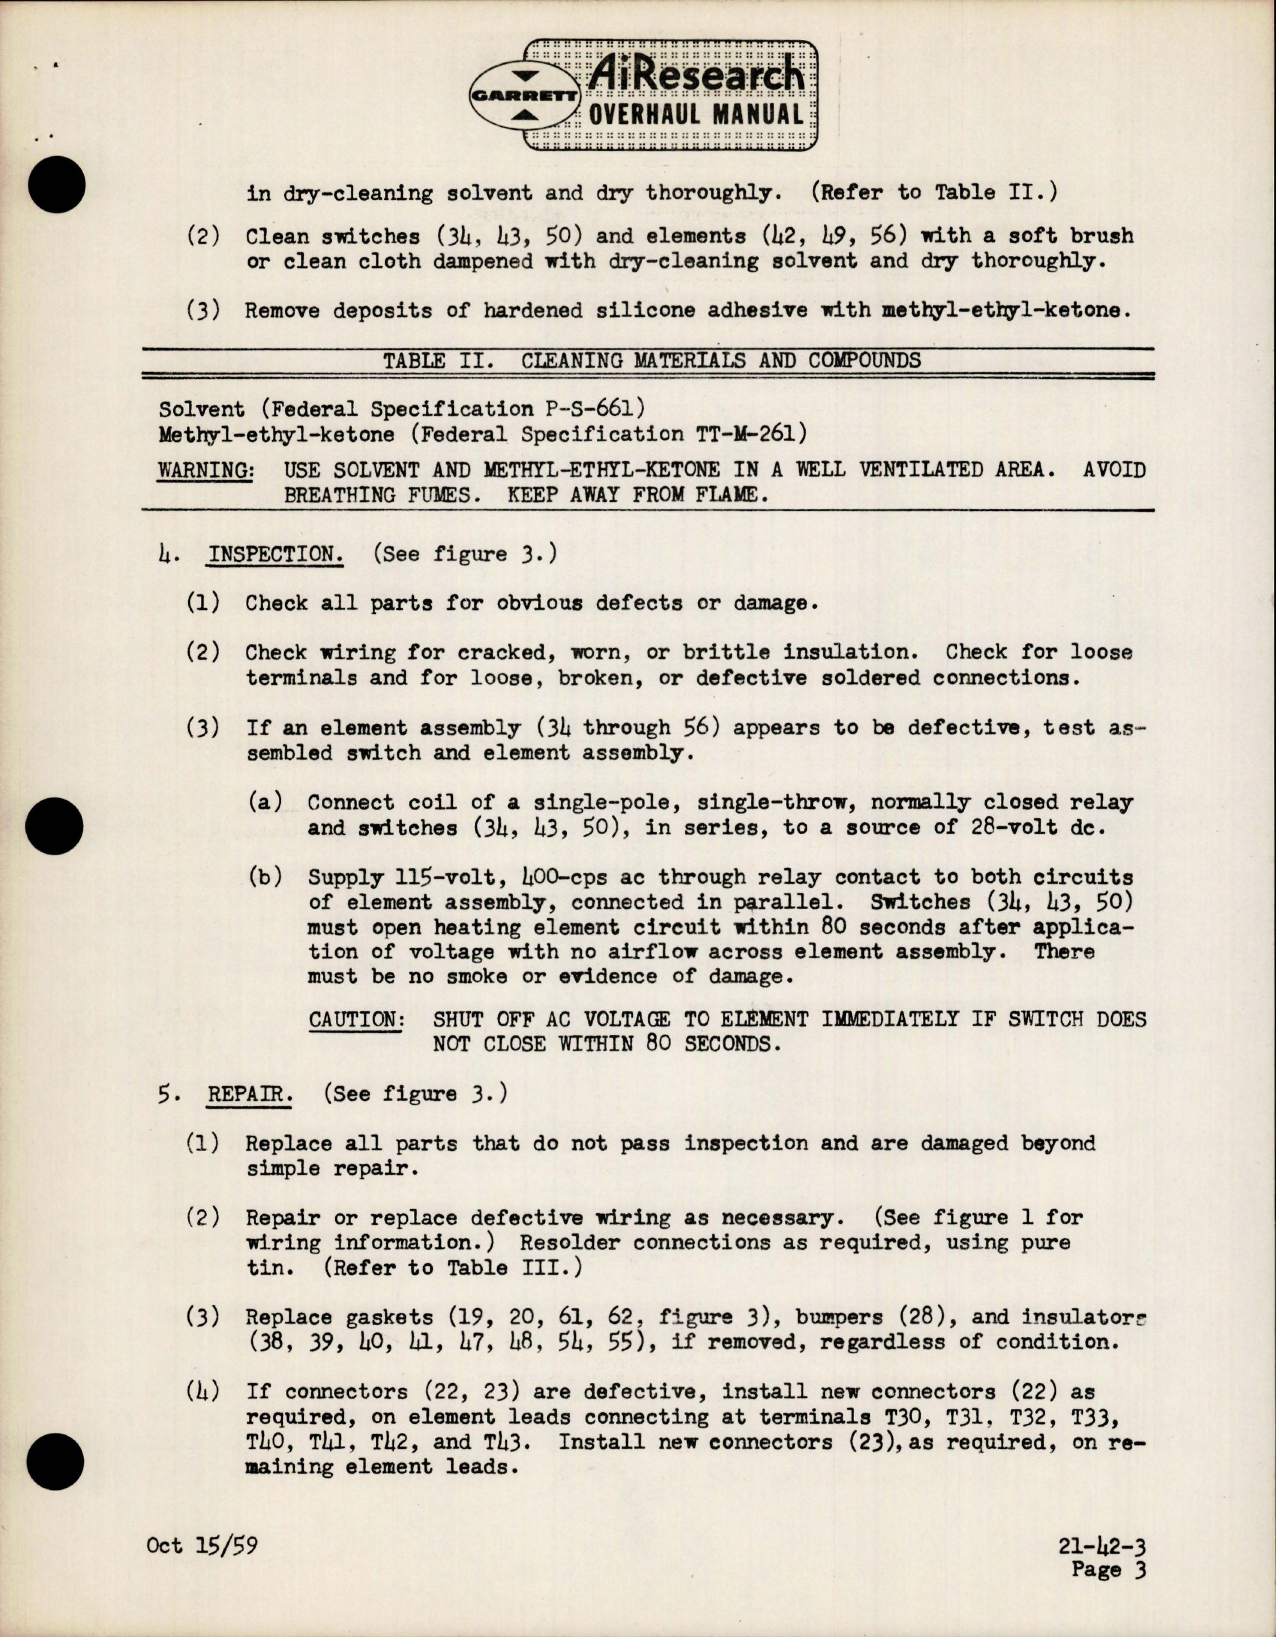 Sample page 7 from AirCorps Library document: Overhaul Manual for Flight Station Electric Heater - Part 85600 